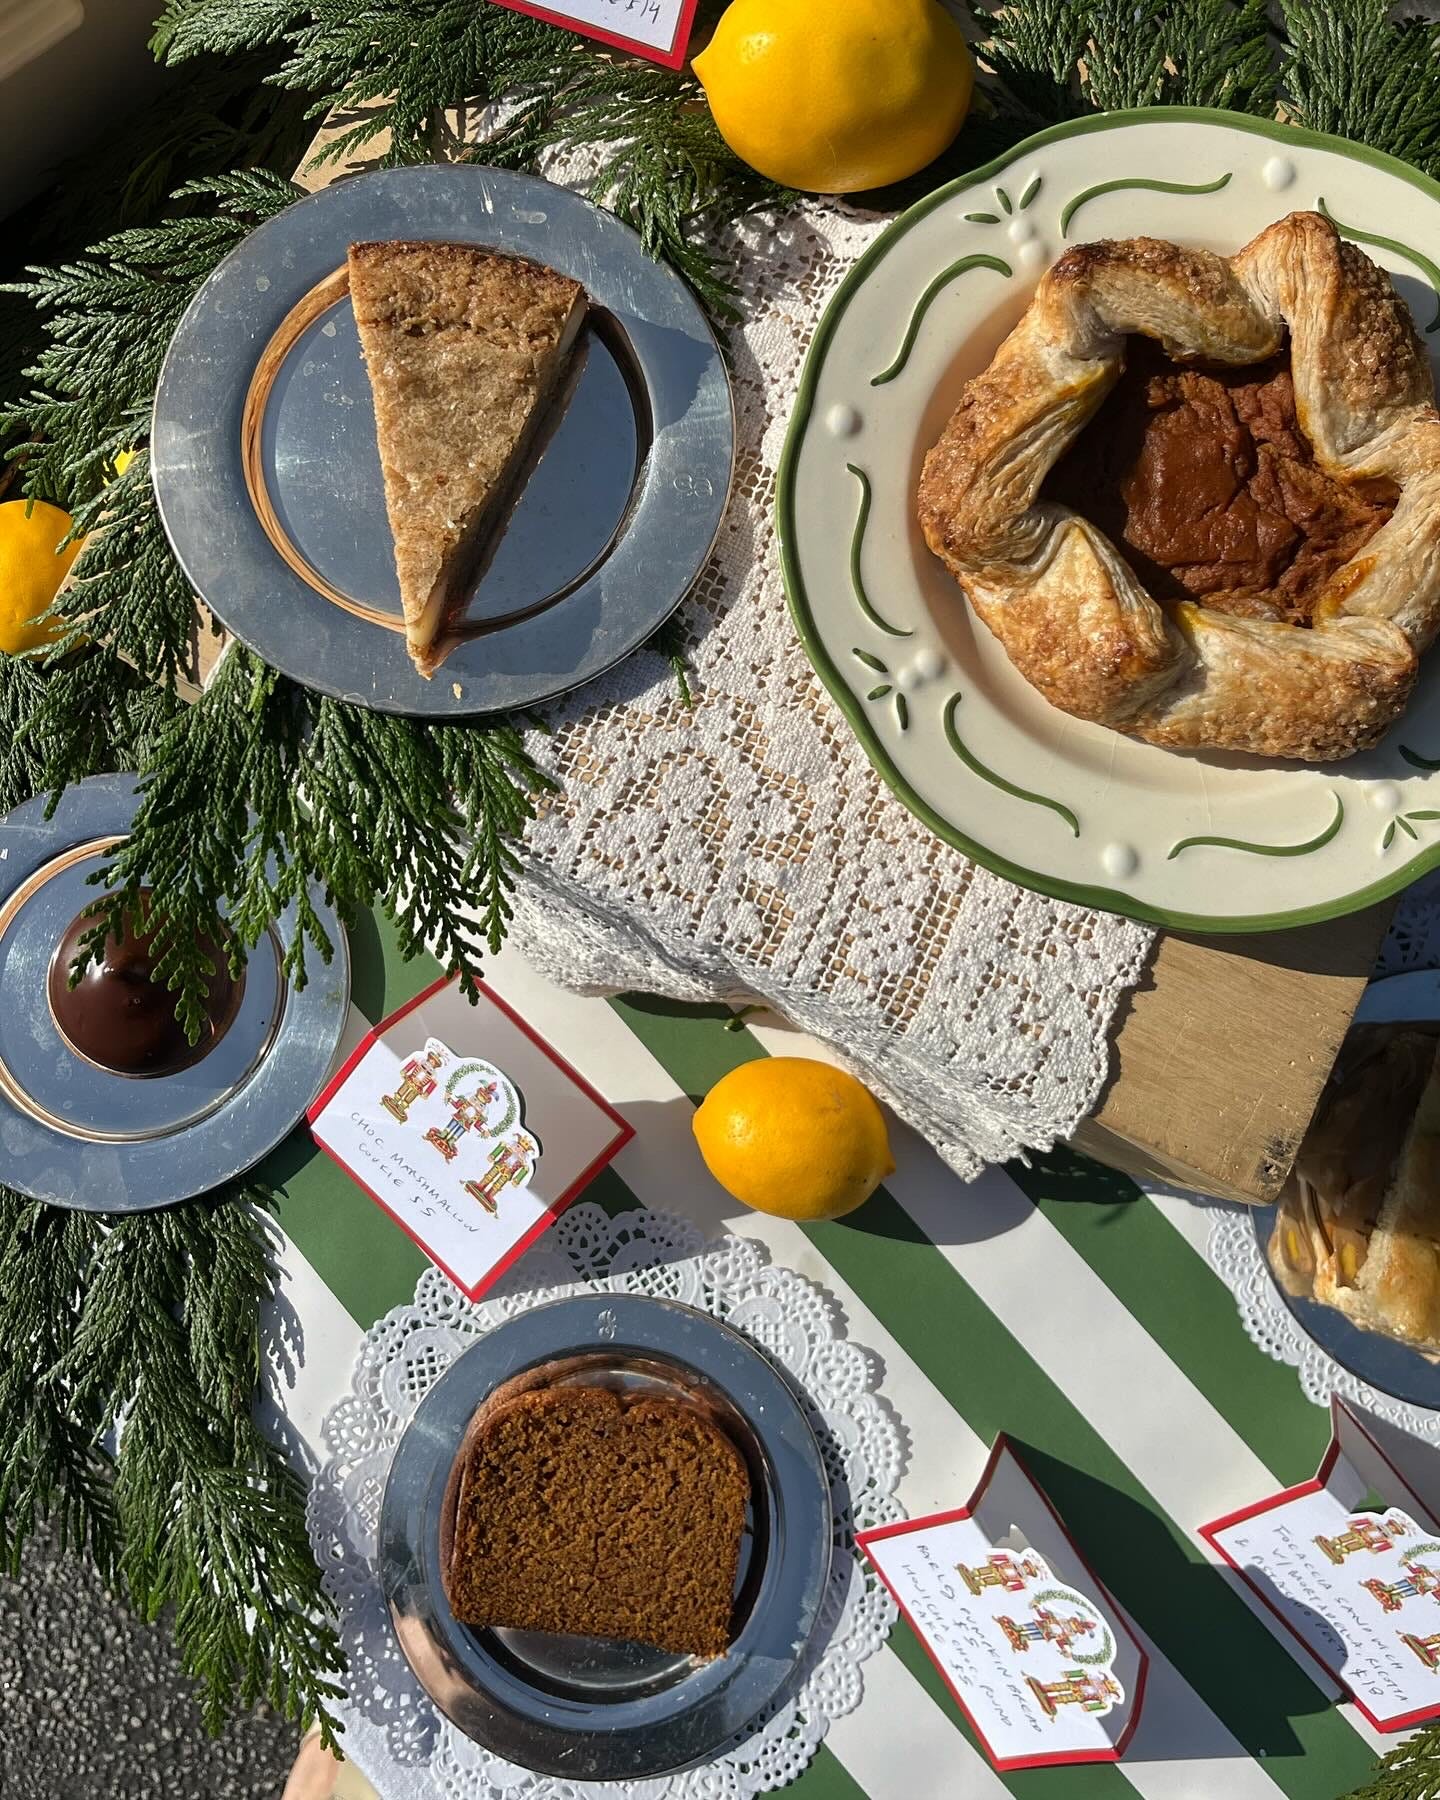 Table set with plates of various baked goods, garland, and lemons atop green and white striped paper.